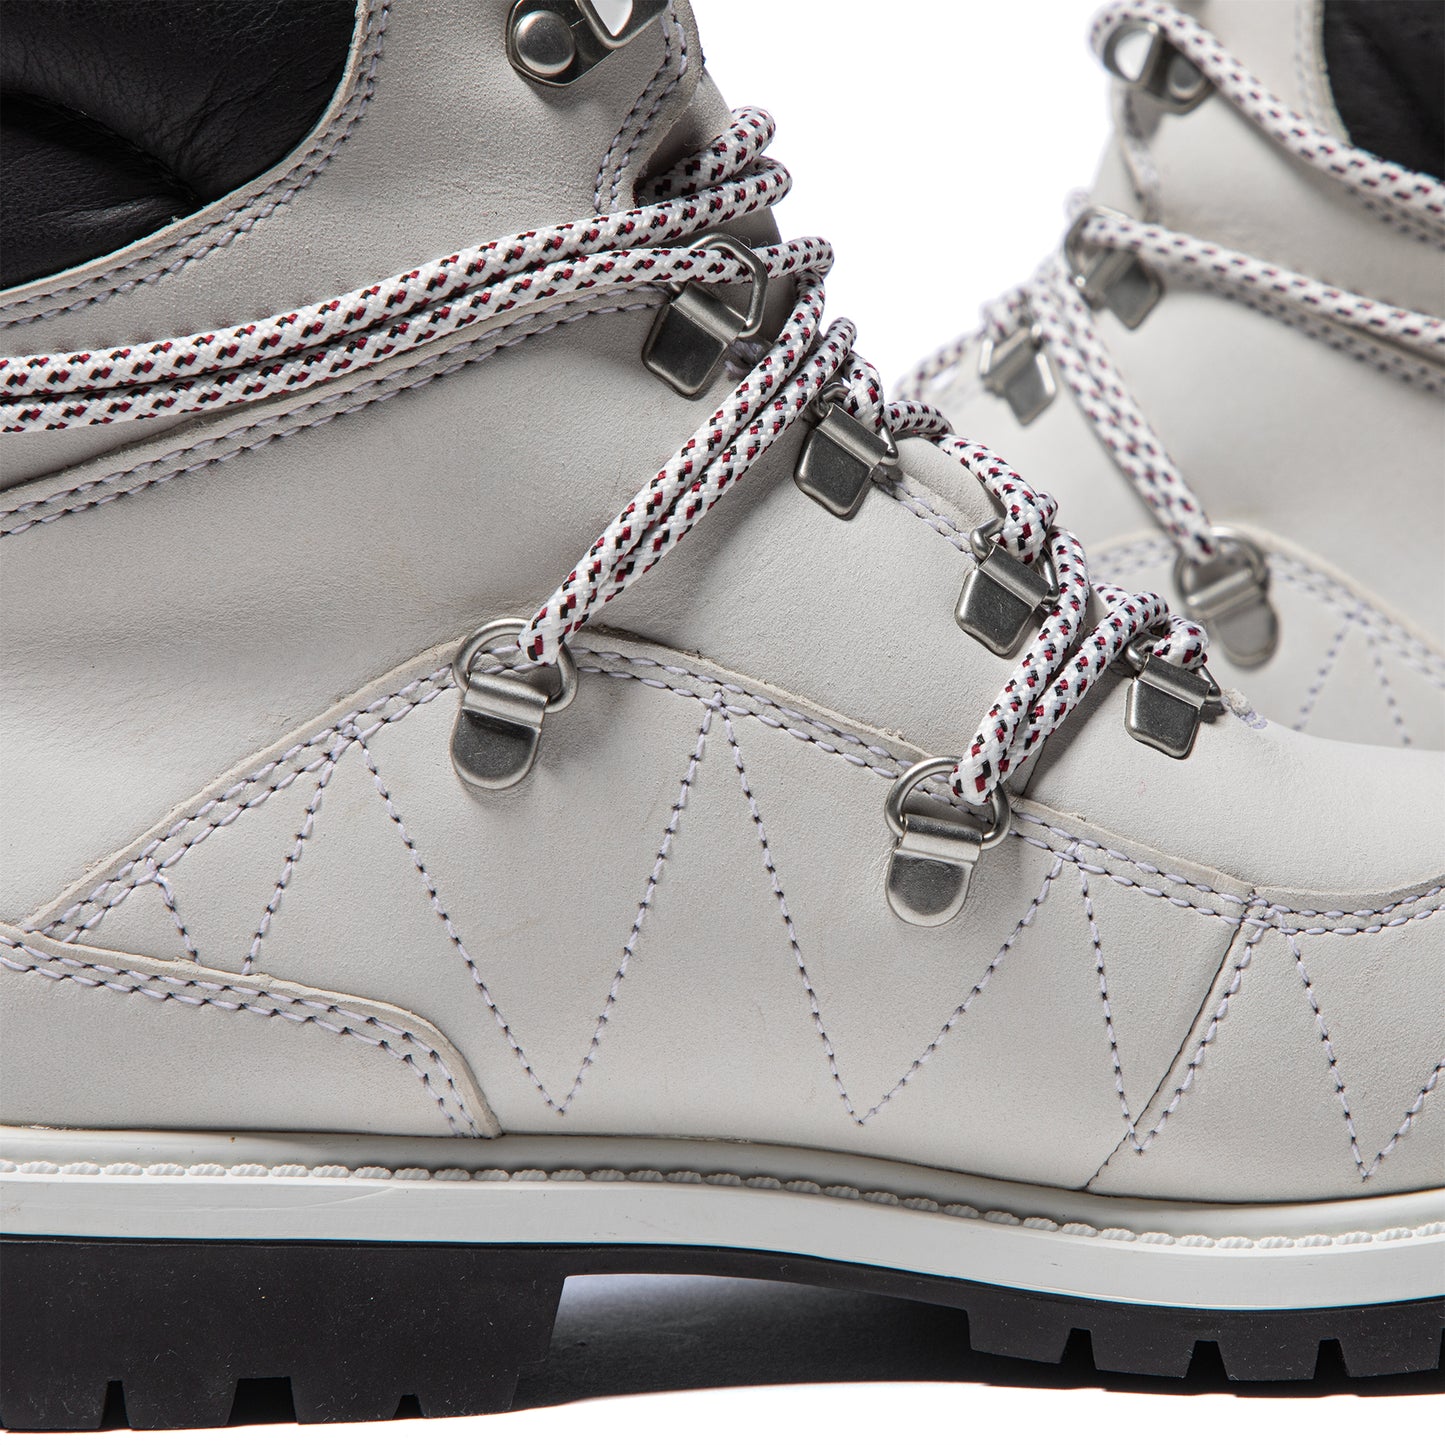 Tommy Hilfiger x Timberland Reimagined Womens 6" Boot (White)